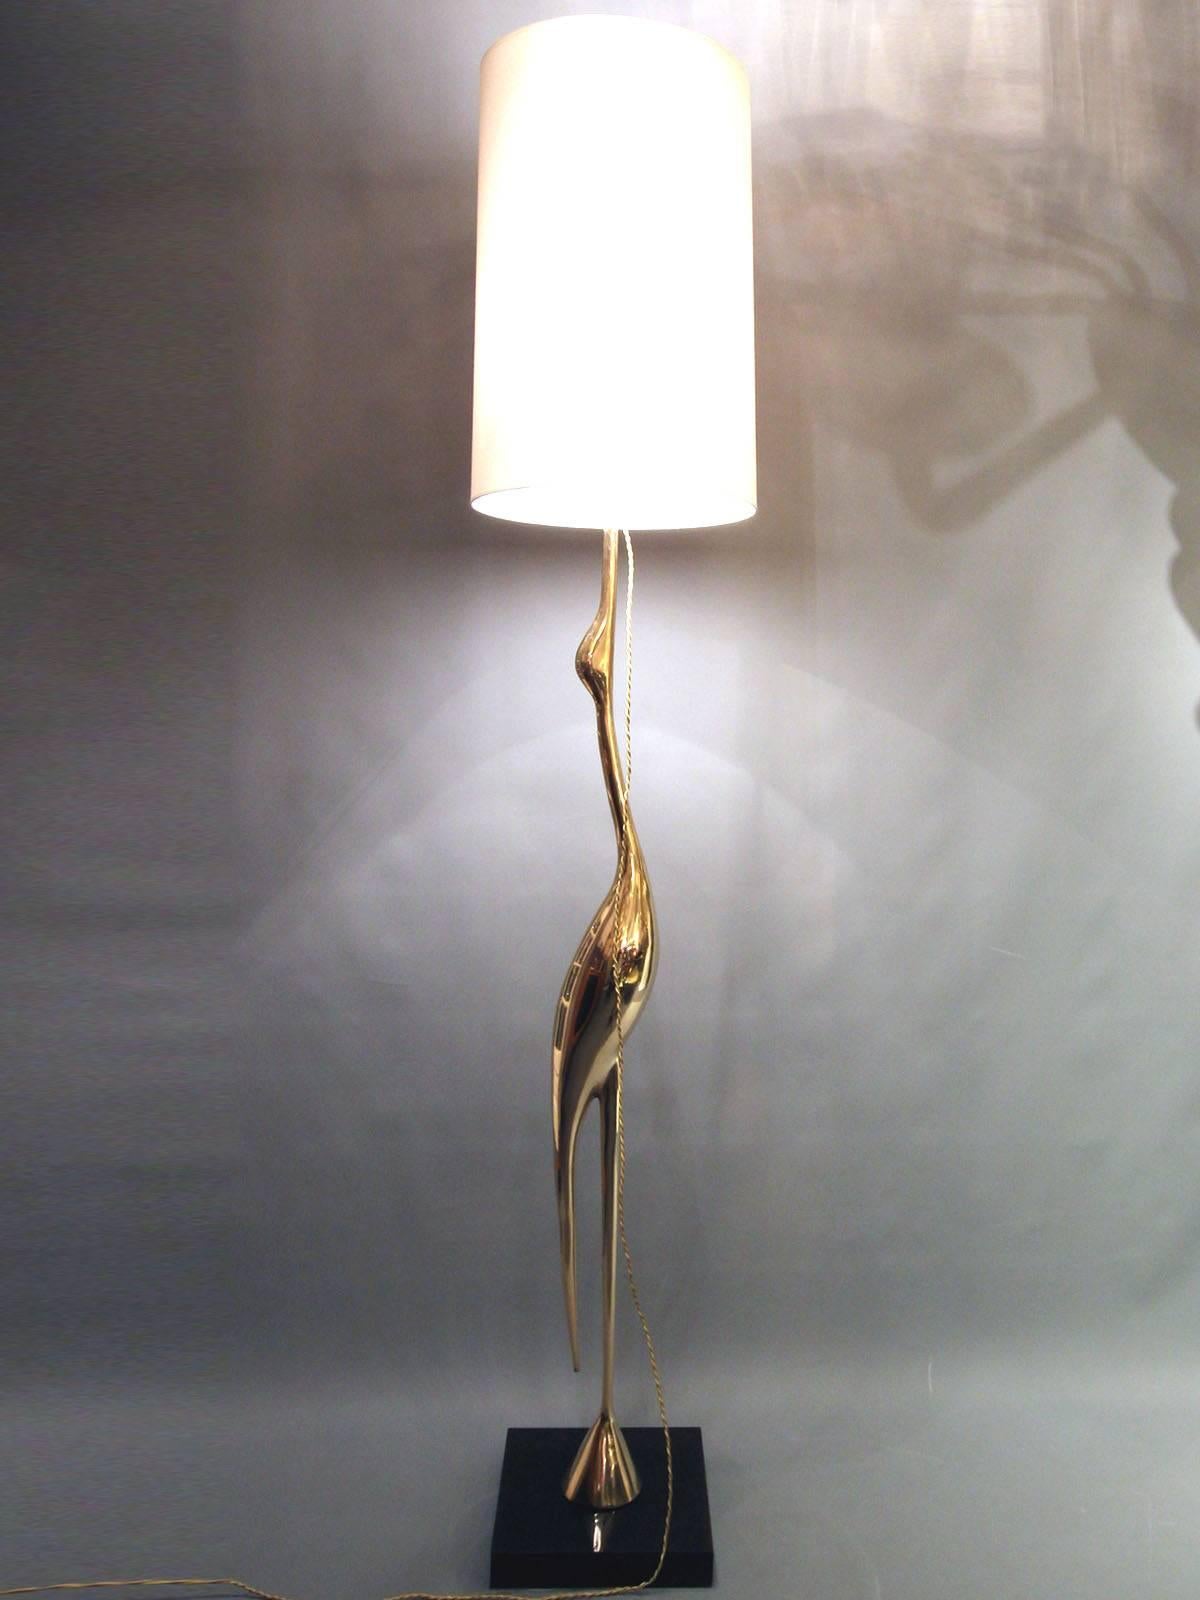 French Heron Floor Lamp by Rene Broissand